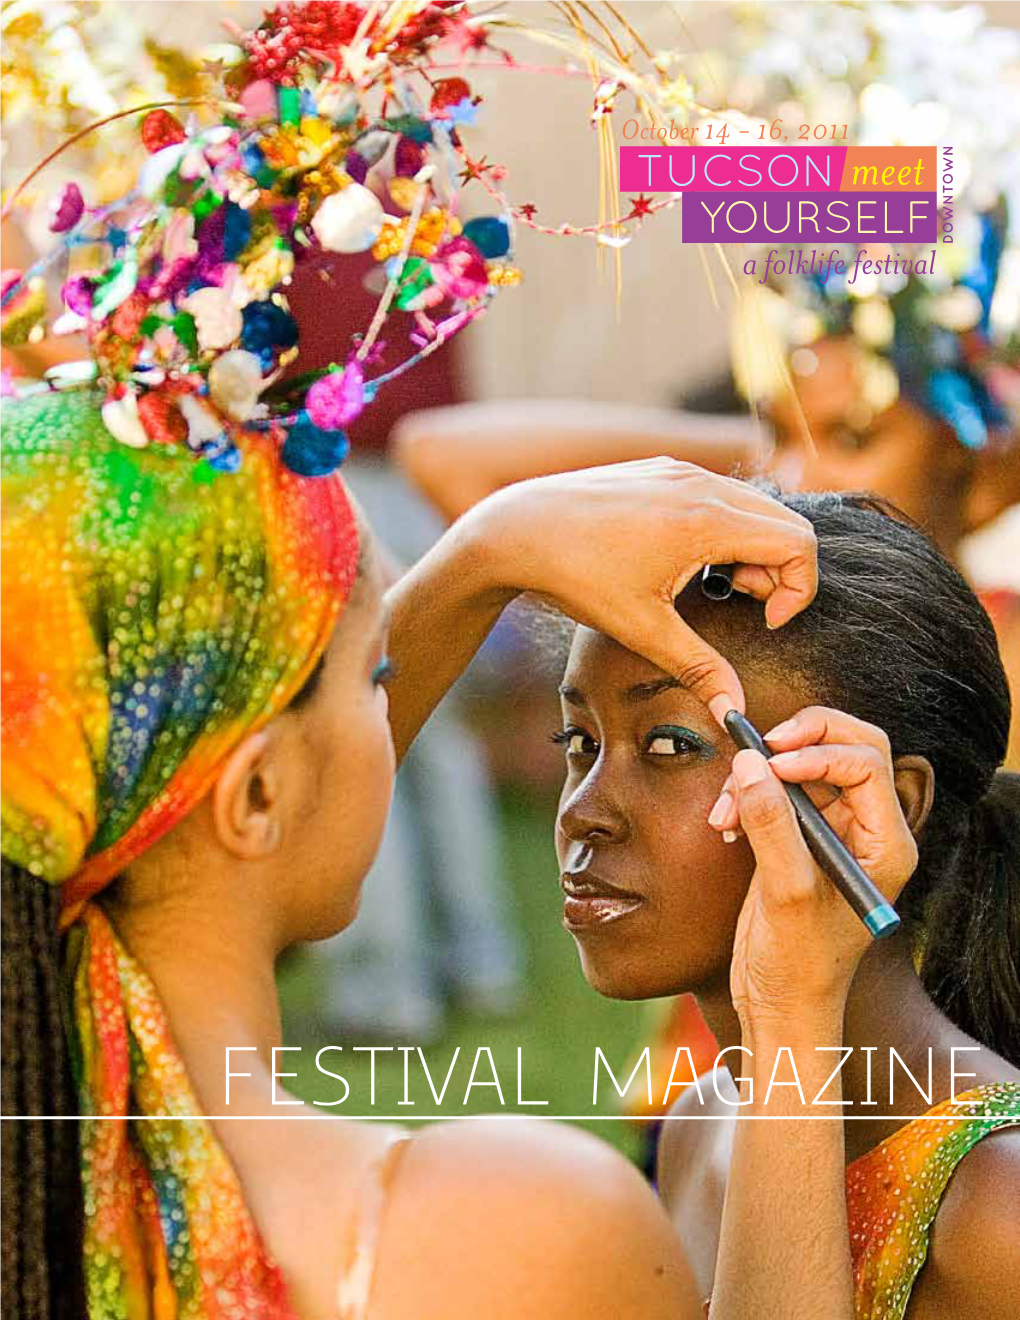 Festival Magazine Highlights of TABLE of CONTENTS